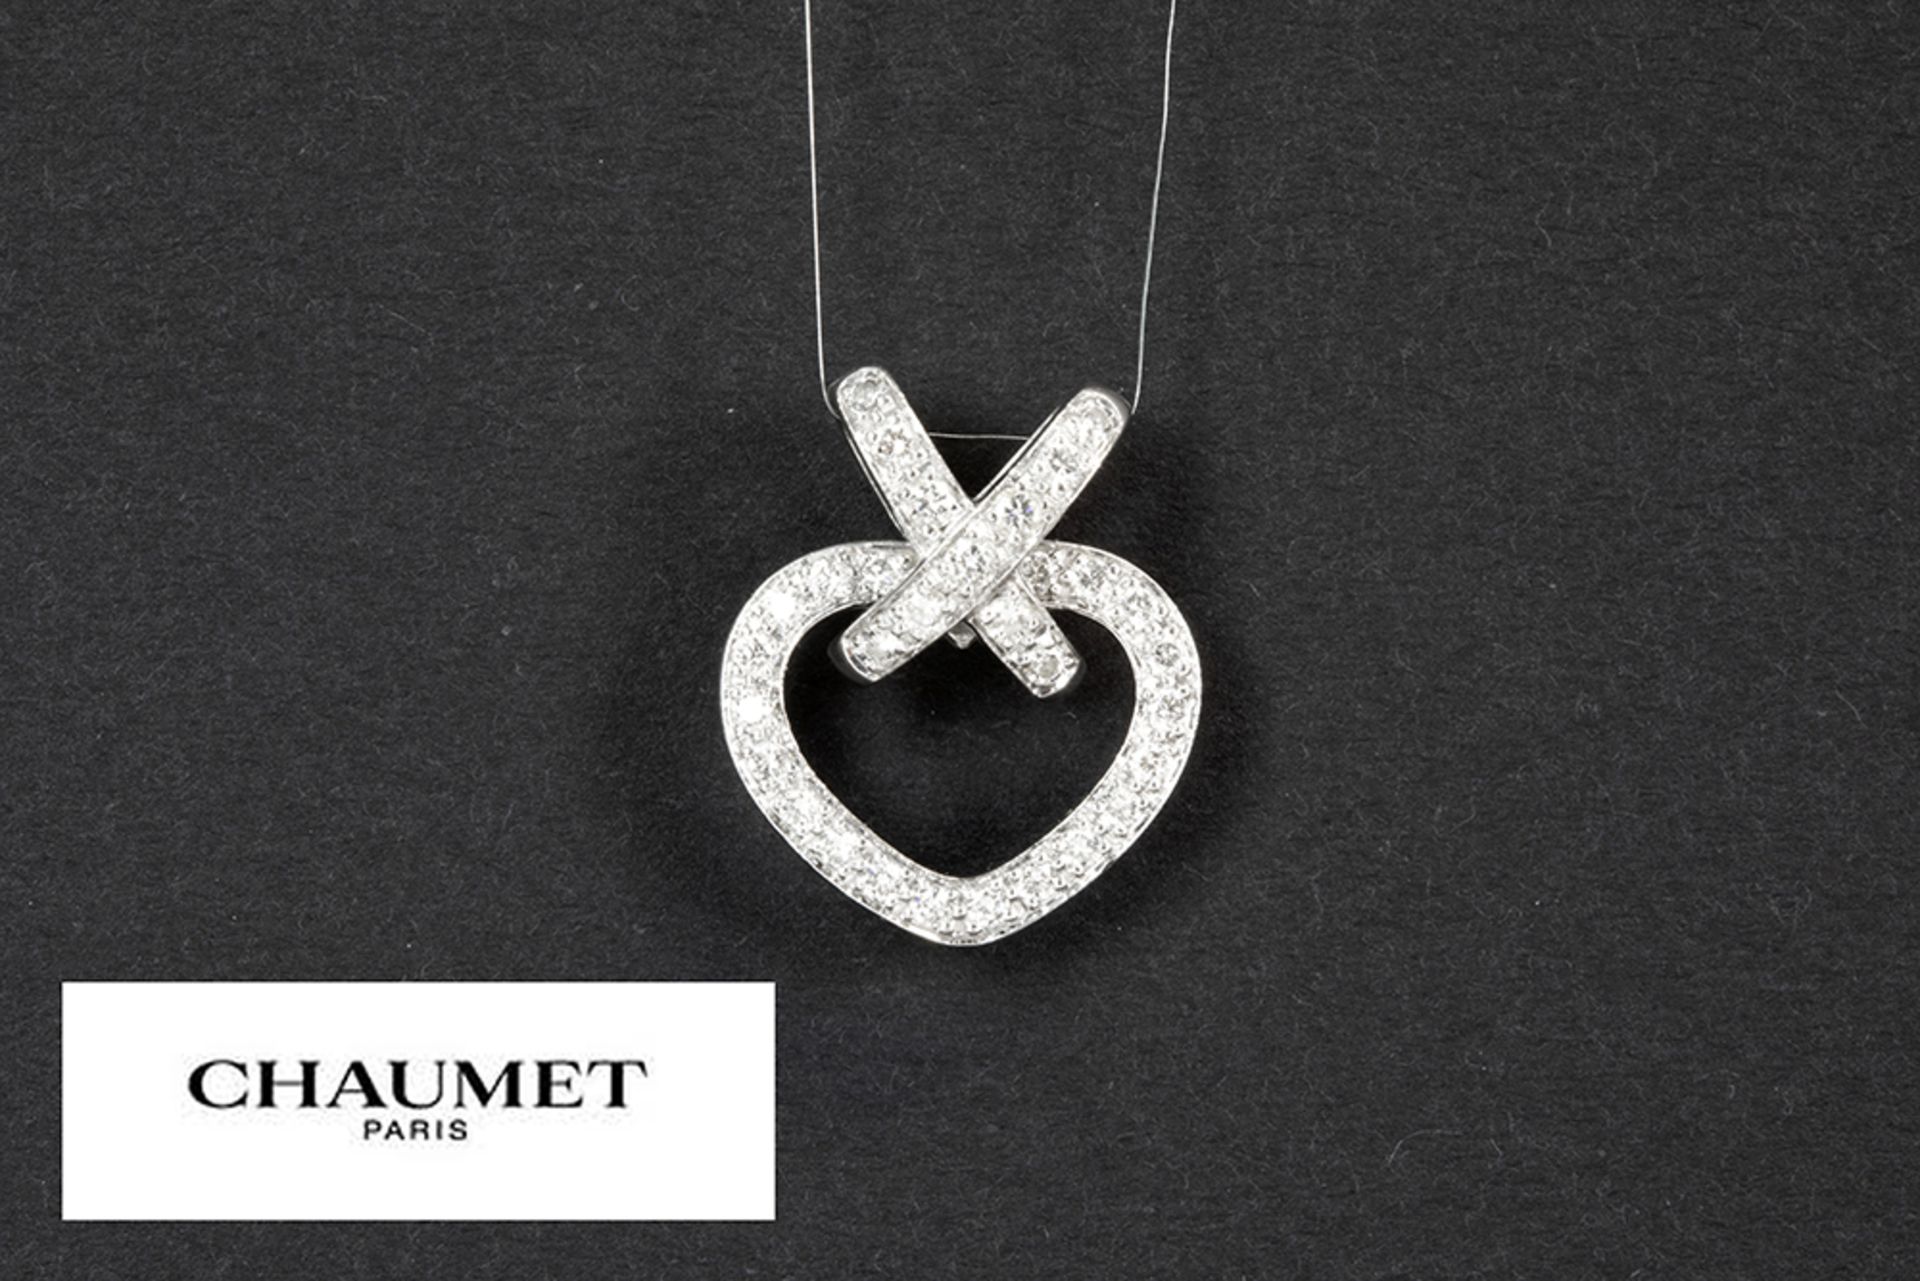 heartshaped Chaumet signed pendant in white gold (18 carat) with ca 0,30 carat of very high